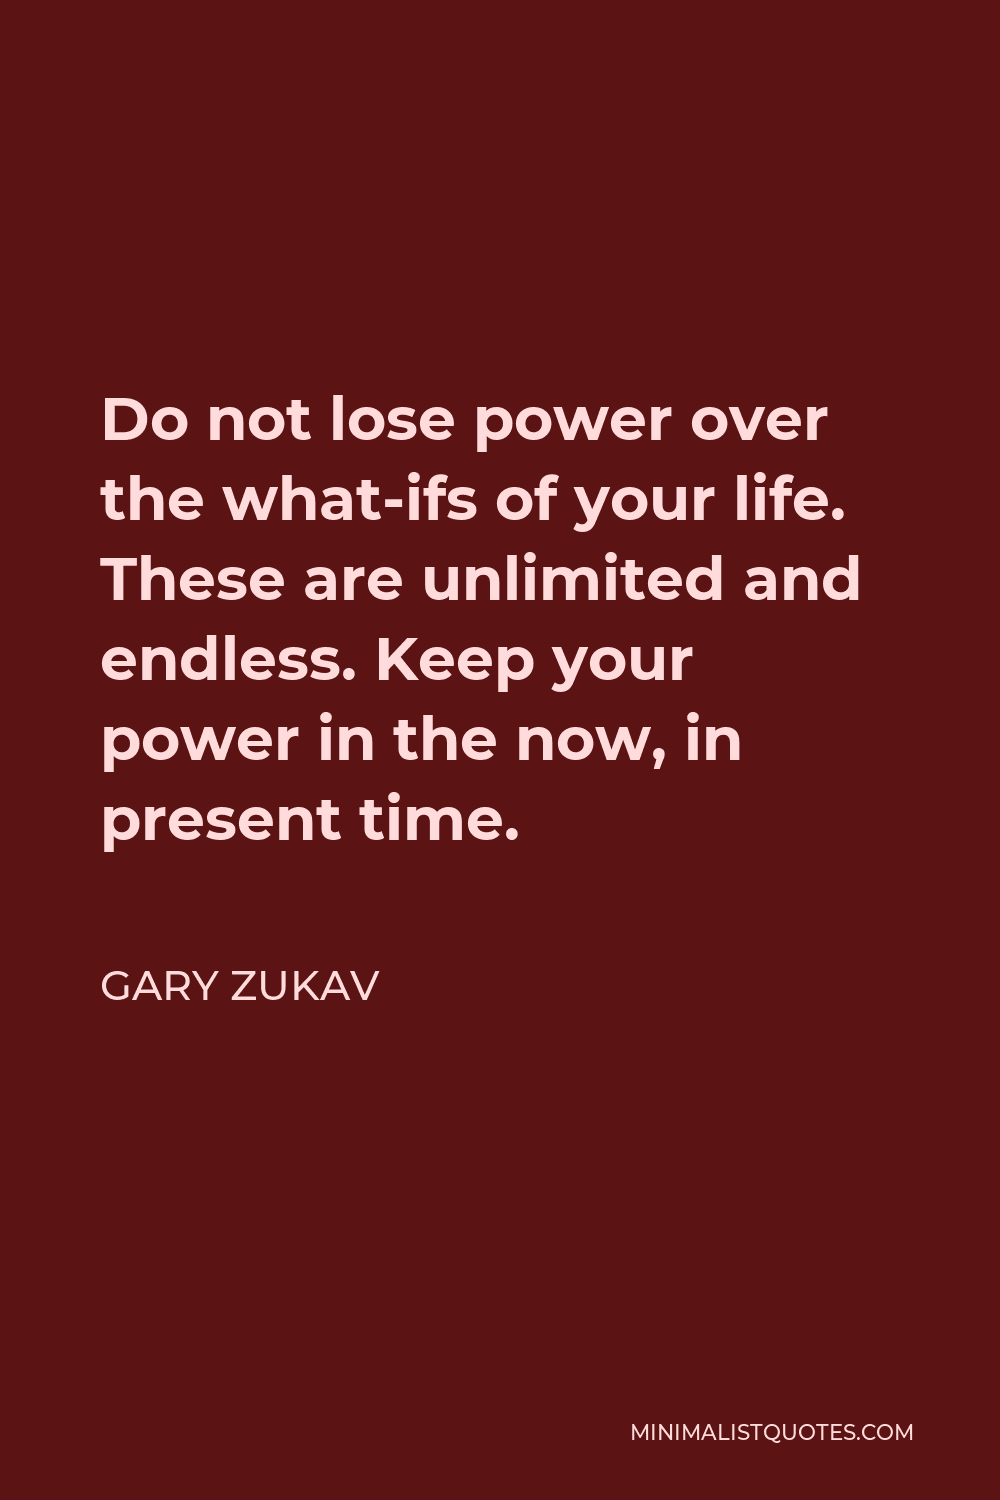 Gary Zukav Quote - Do not lose power over the what-ifs of your life. These are unlimited and endless. Keep your power in the now, in present time.